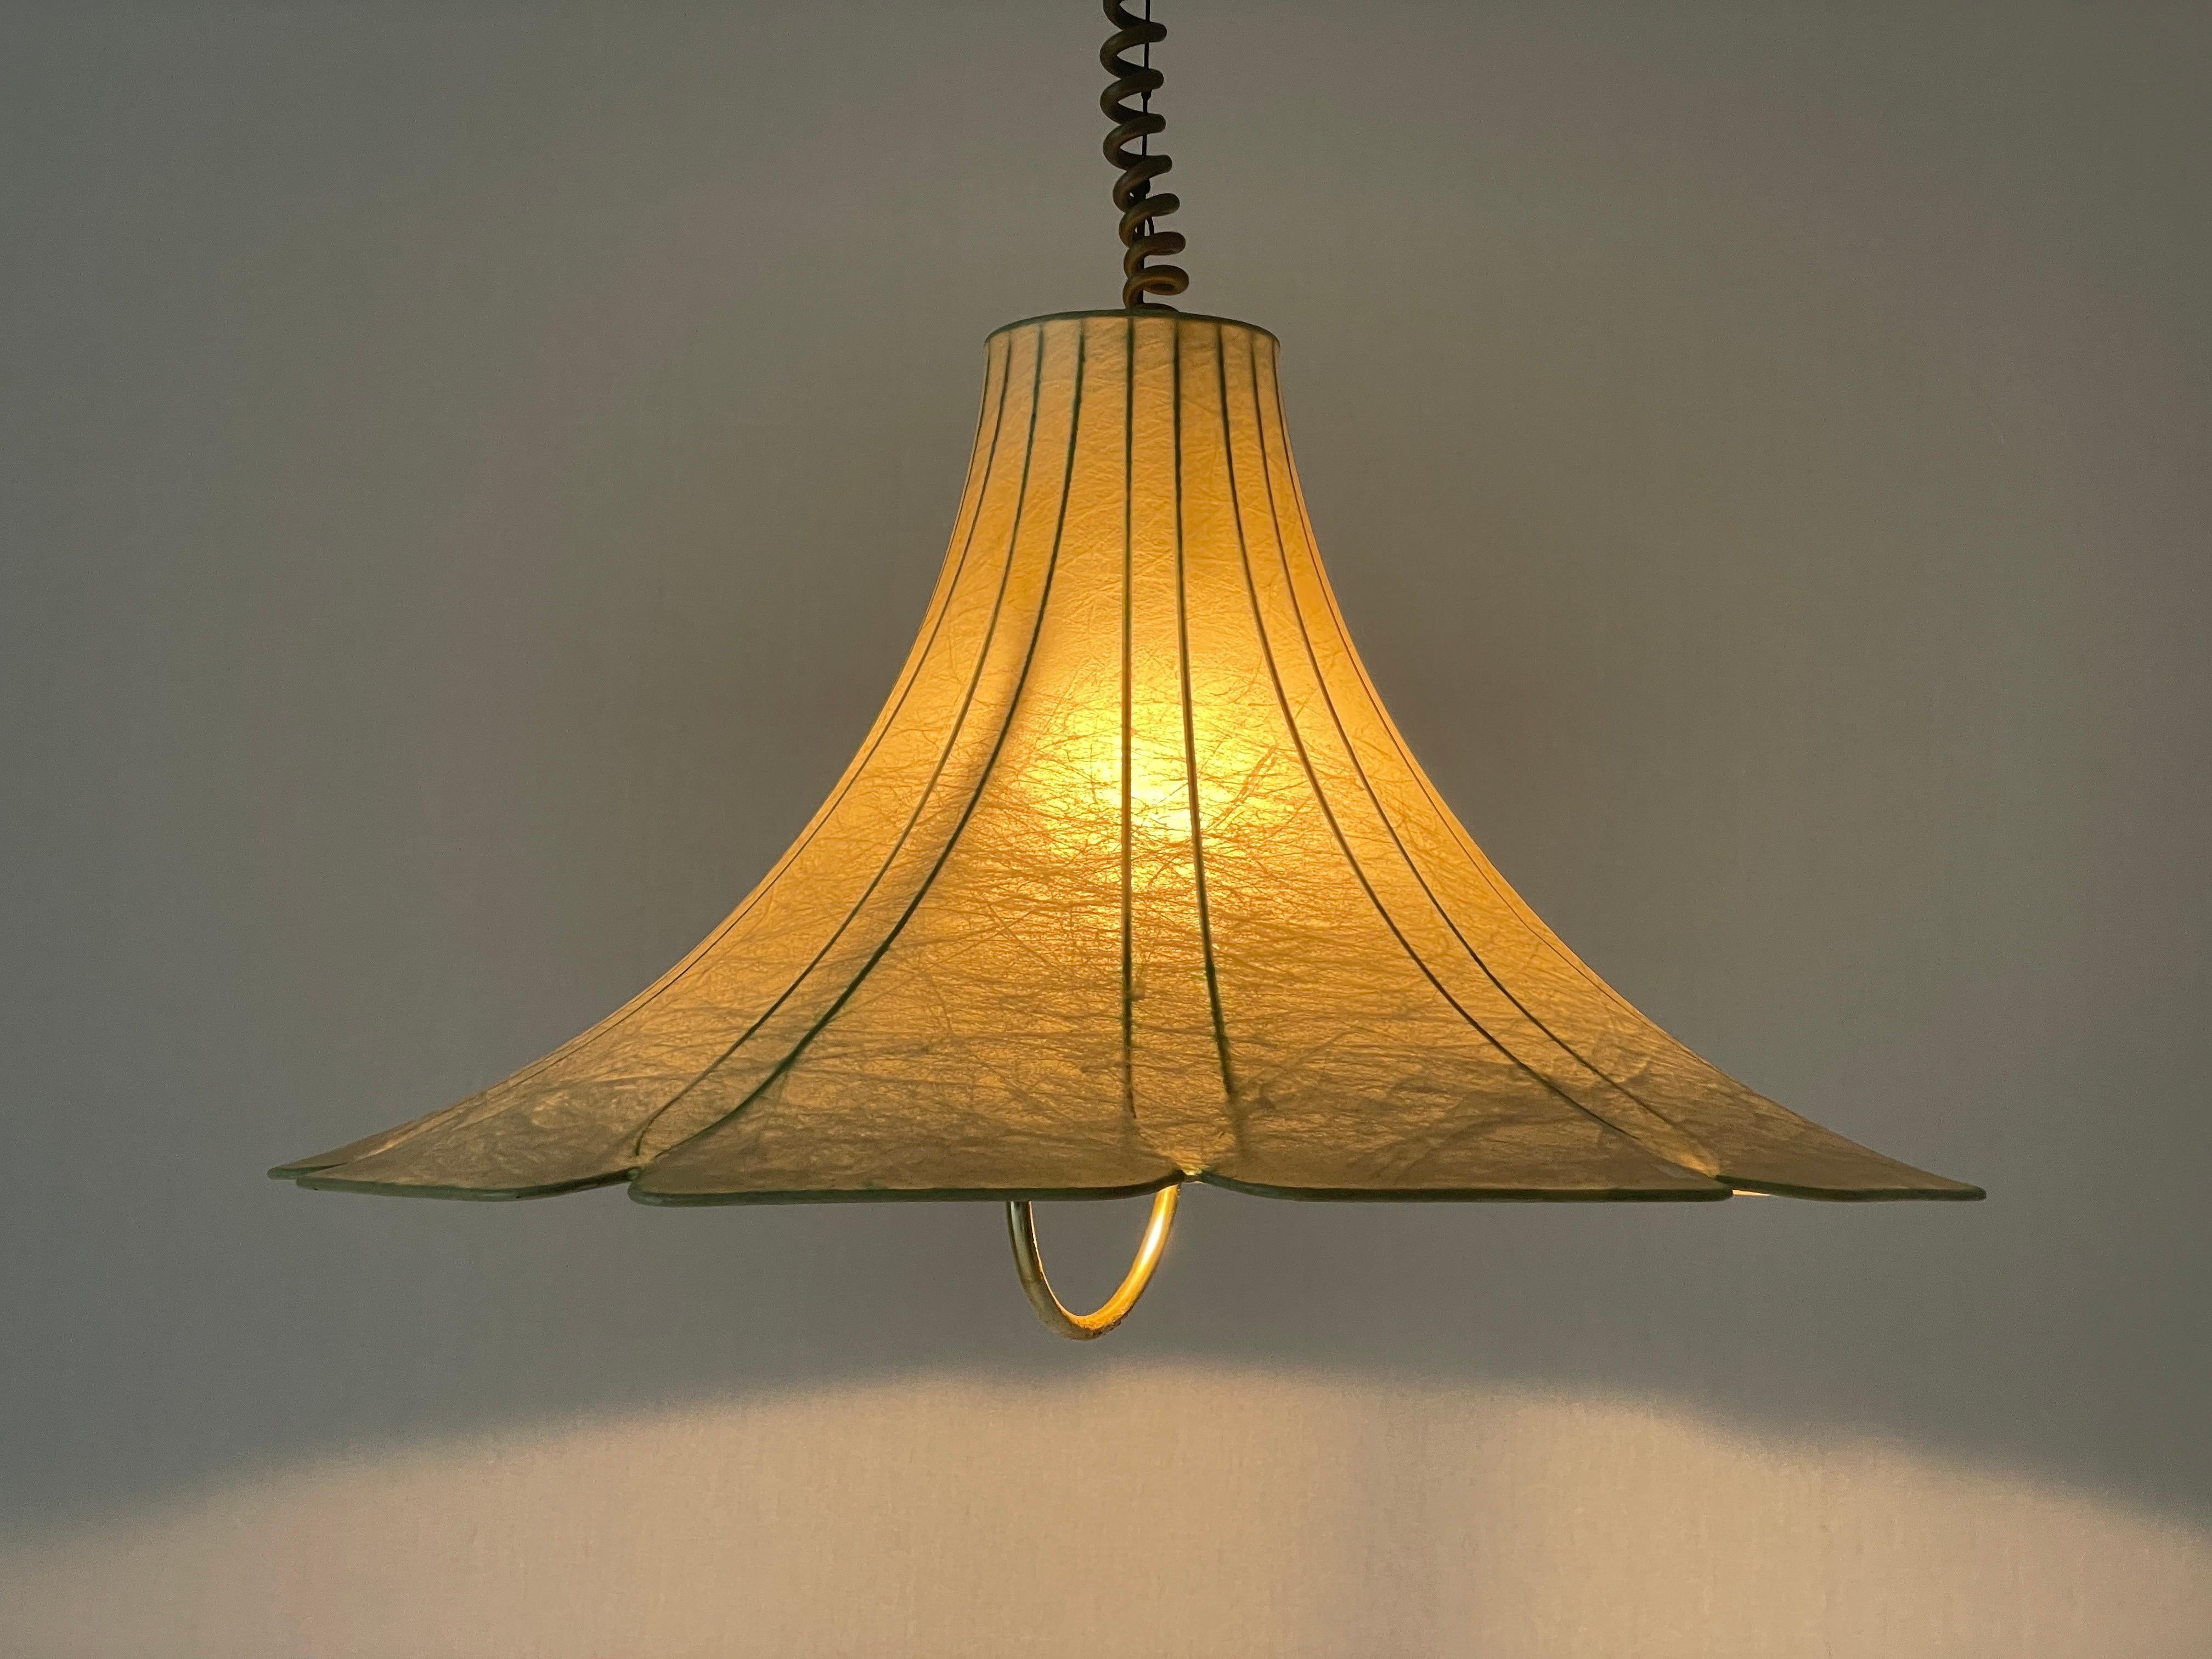 Tulip Design Cocoon Adjustable Height Pendant Lamp by Goldkant, 1960s, Germany For Sale 2